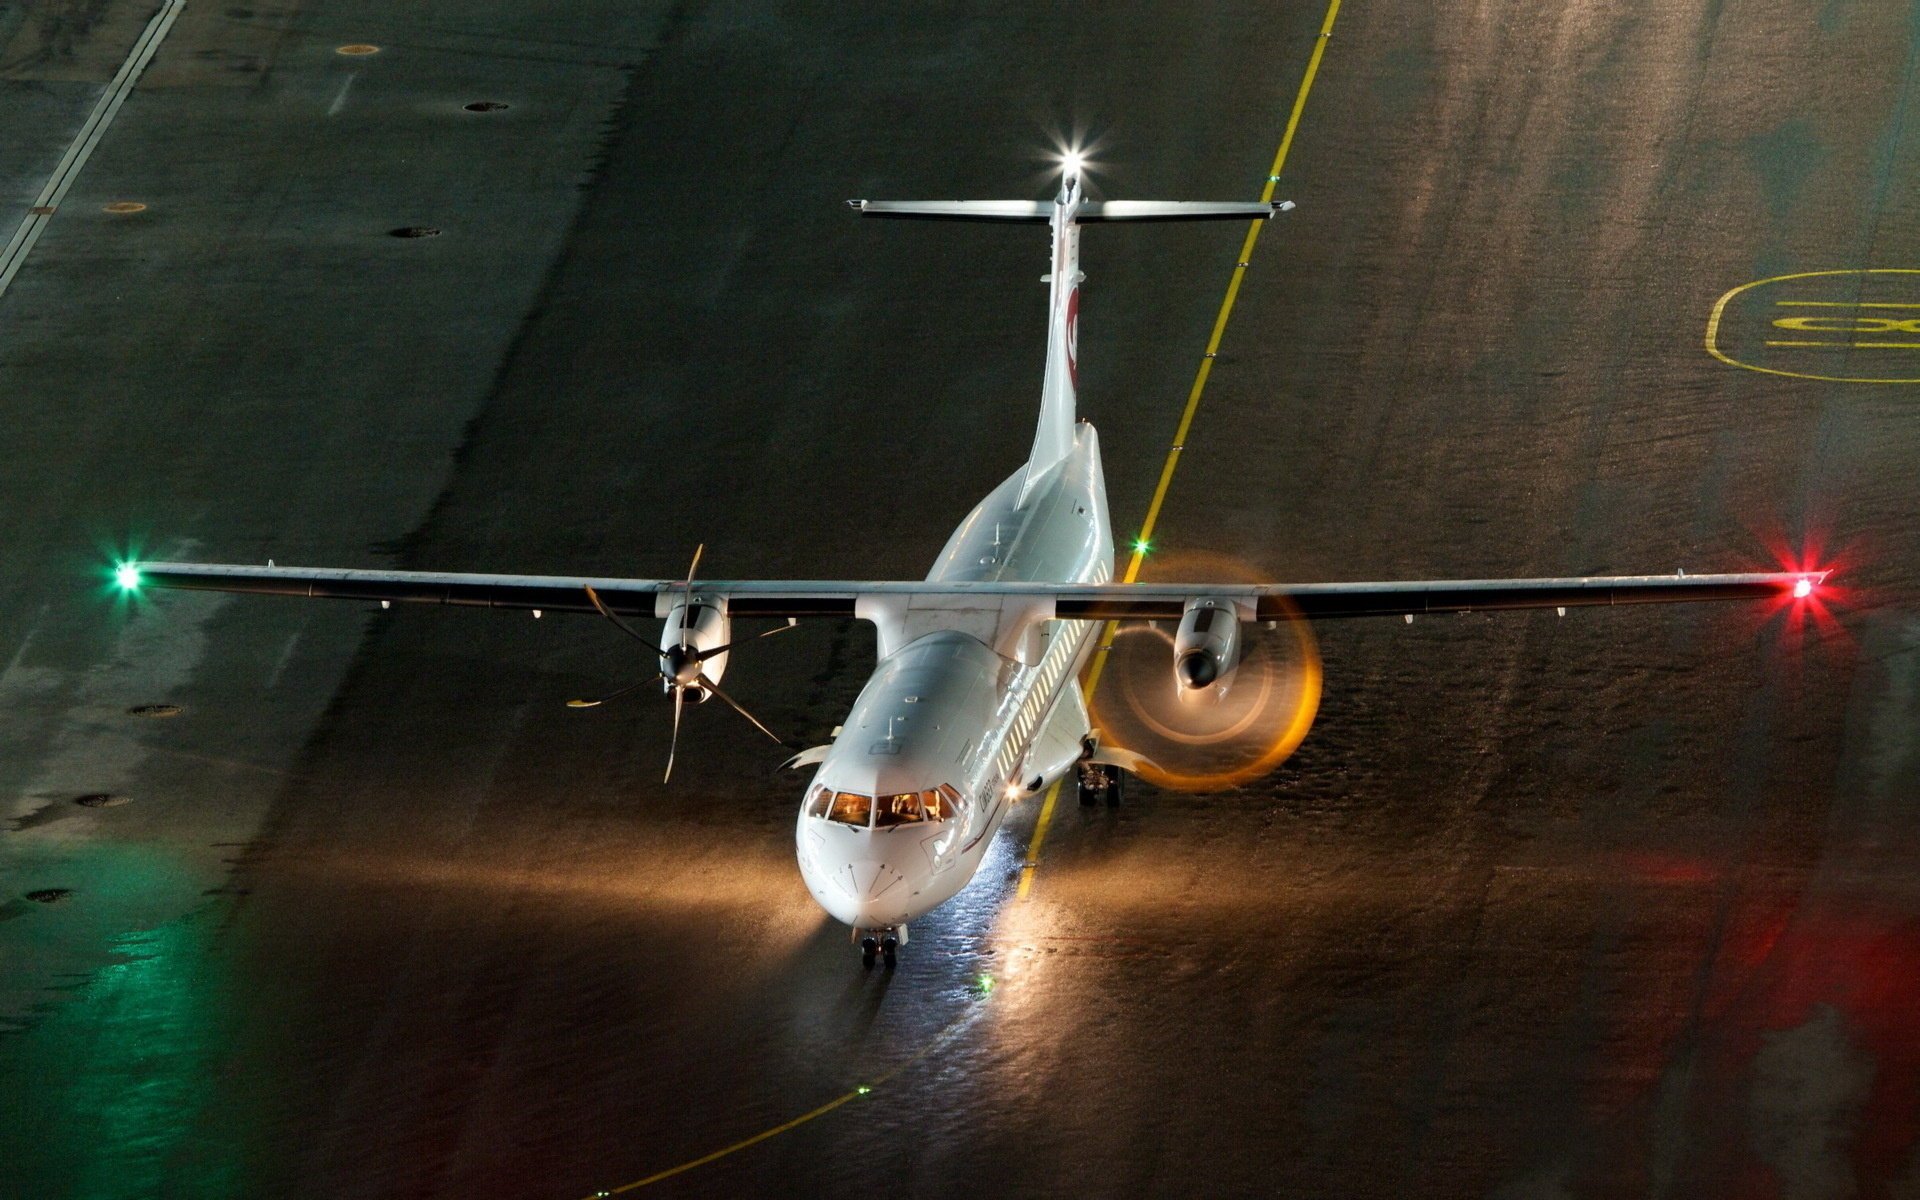 A plane with burning lights at the airfield at night